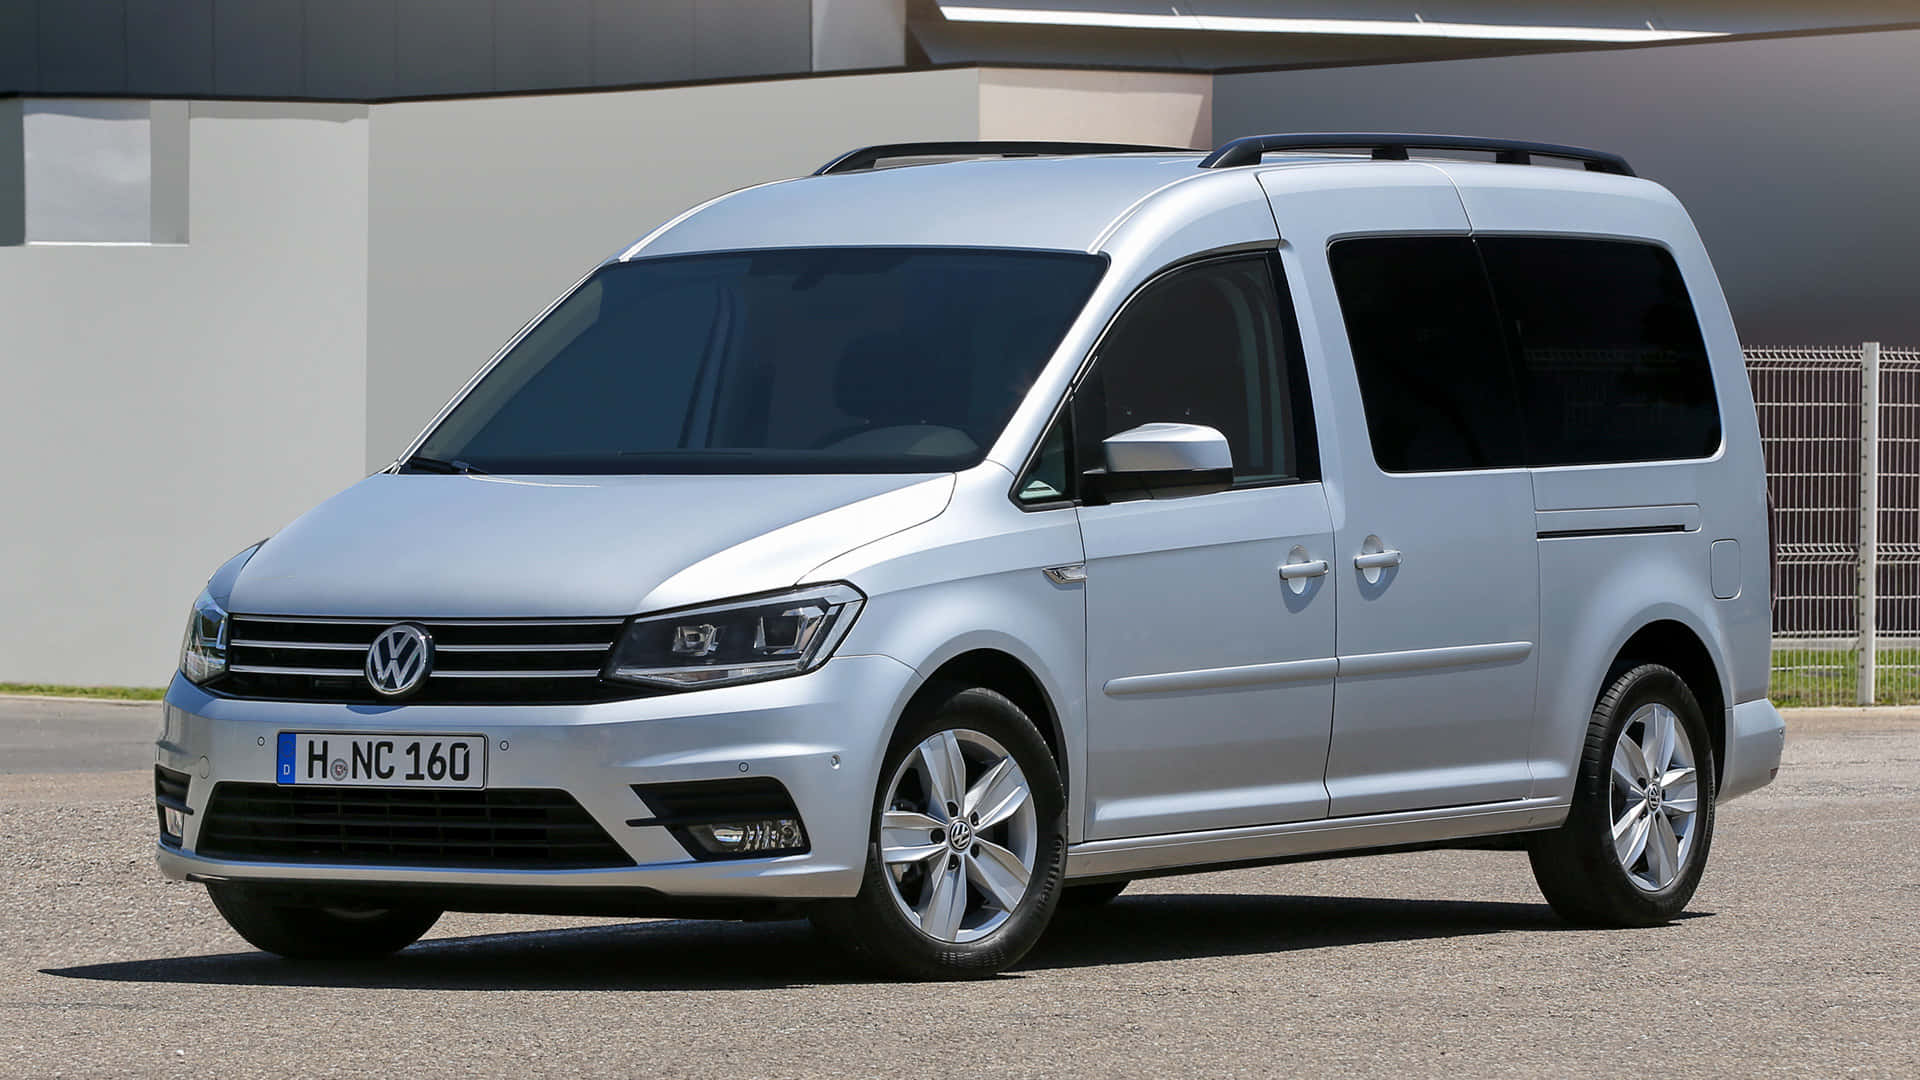 A Sleek Volkswagen Caddy Showcasing Its Dynamic Design On The Road. Wallpaper